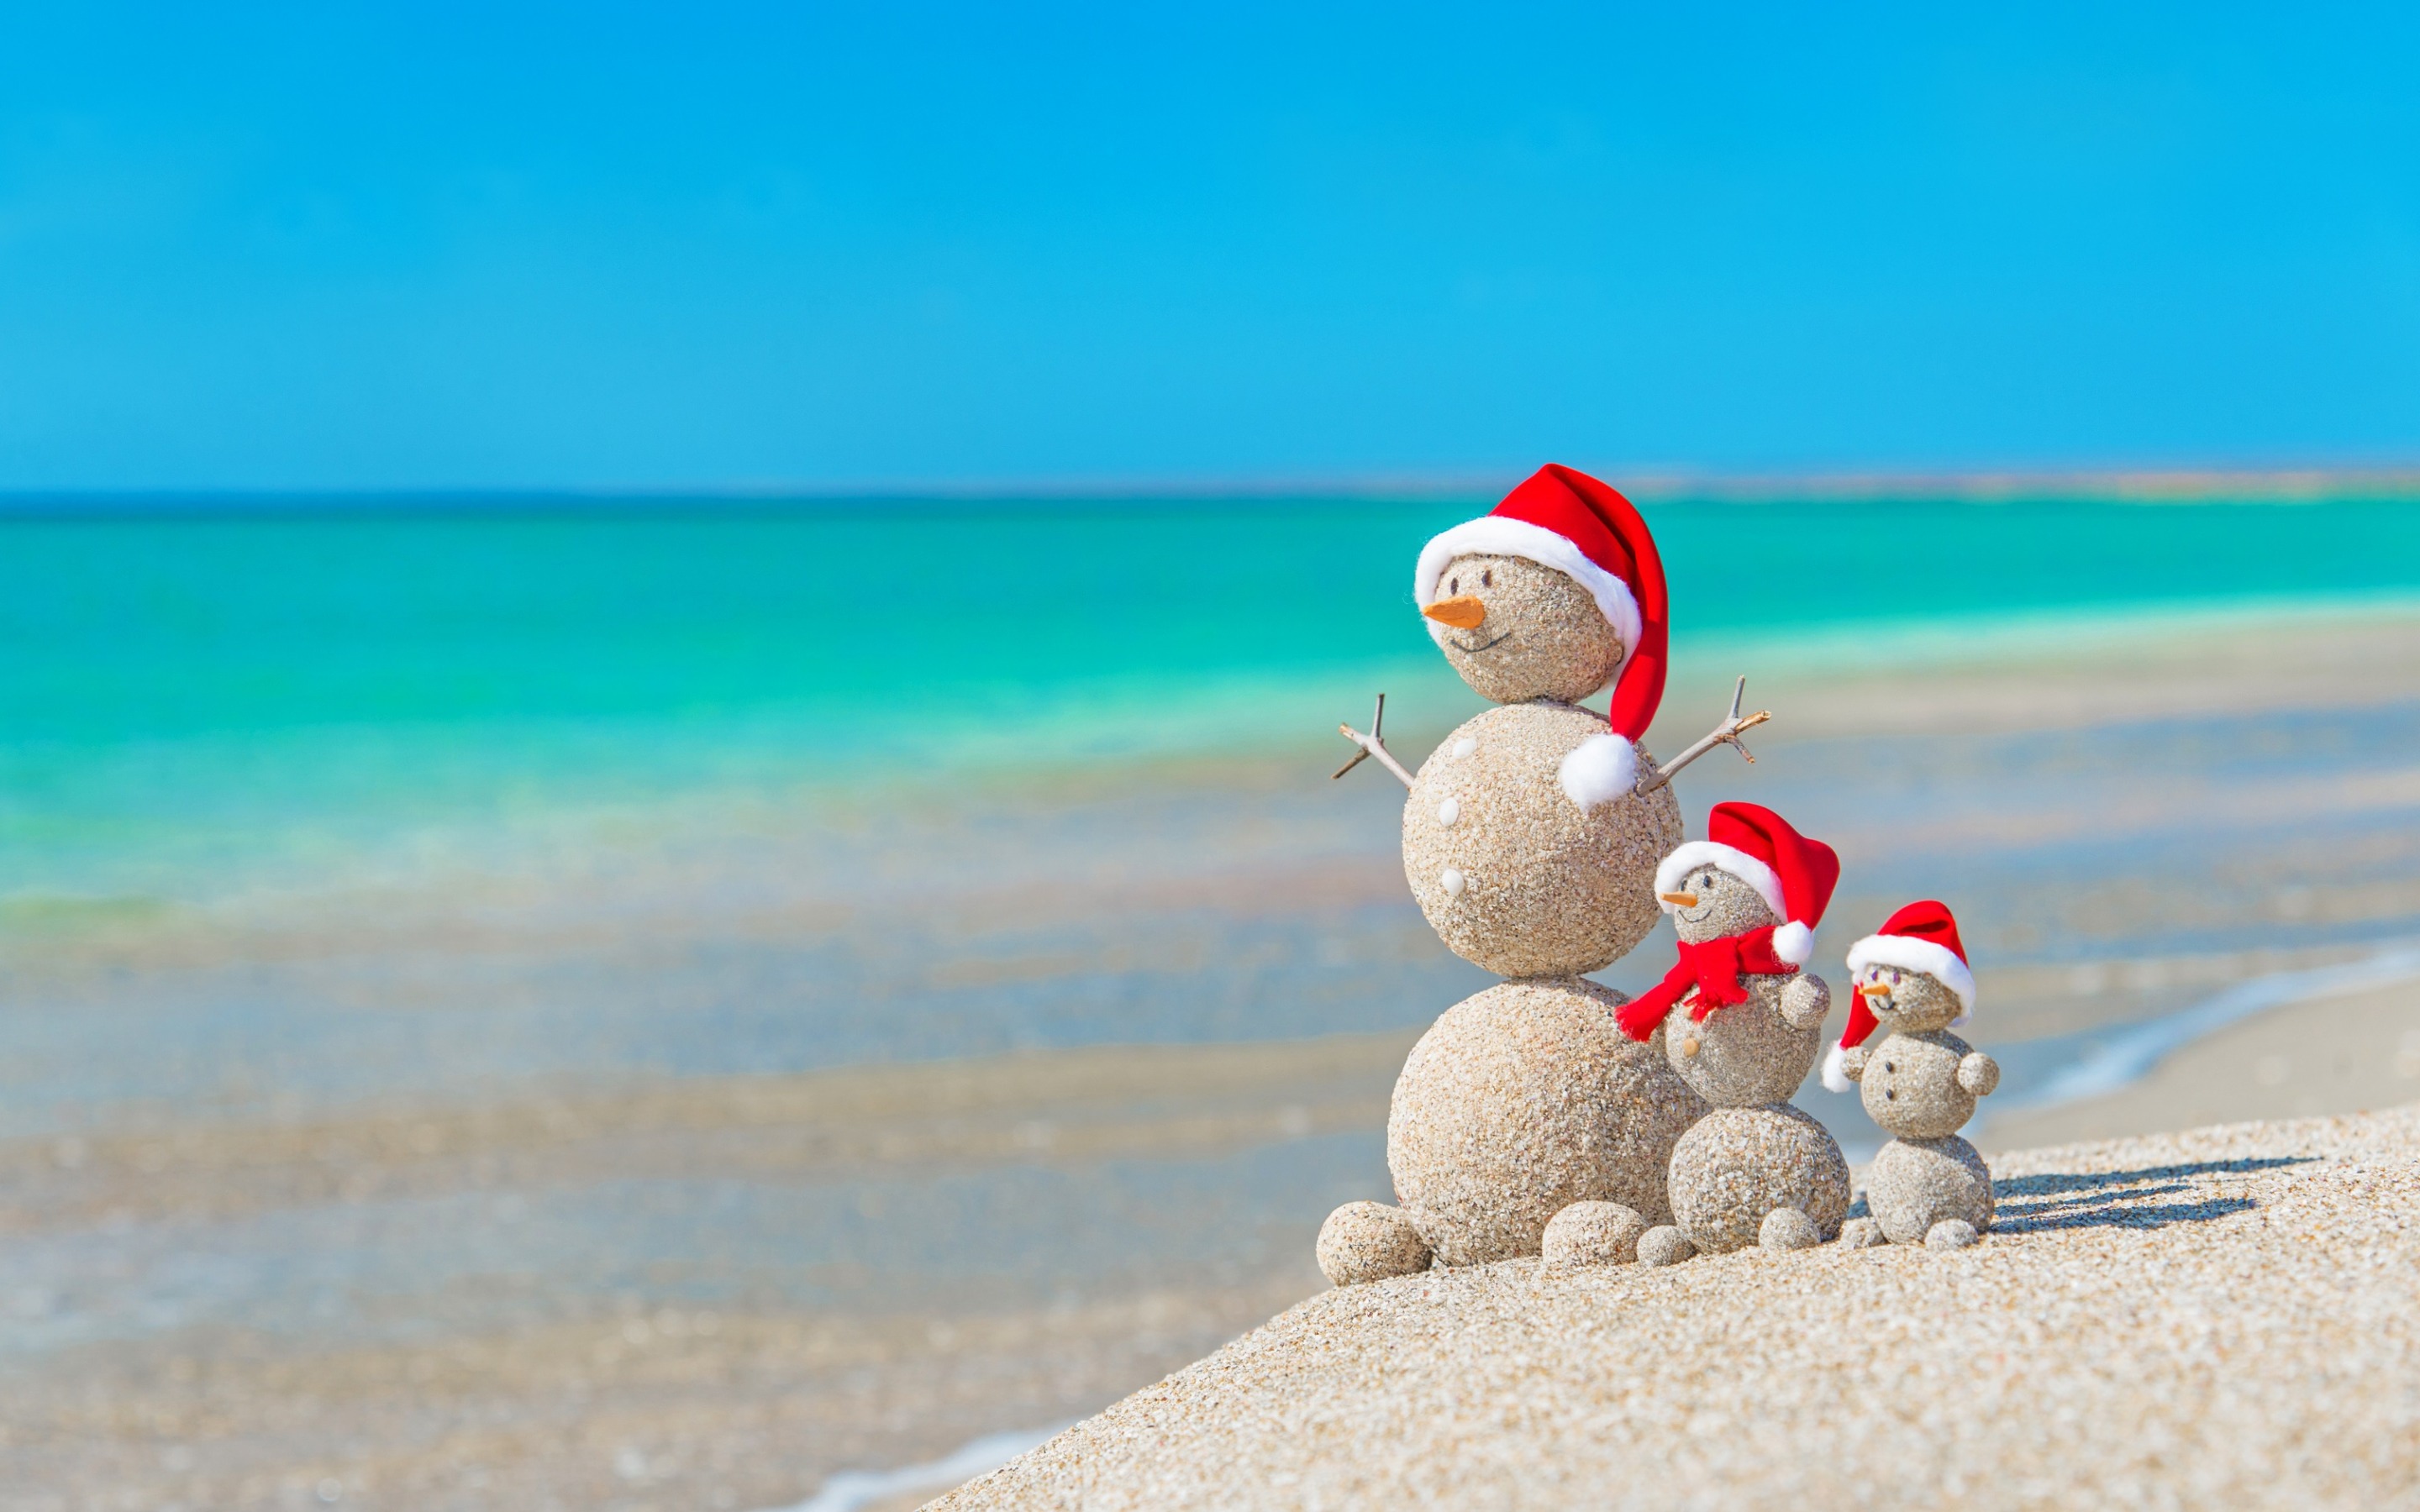 Download wallpapers Christmas, tropical islands, beach, snowmen from